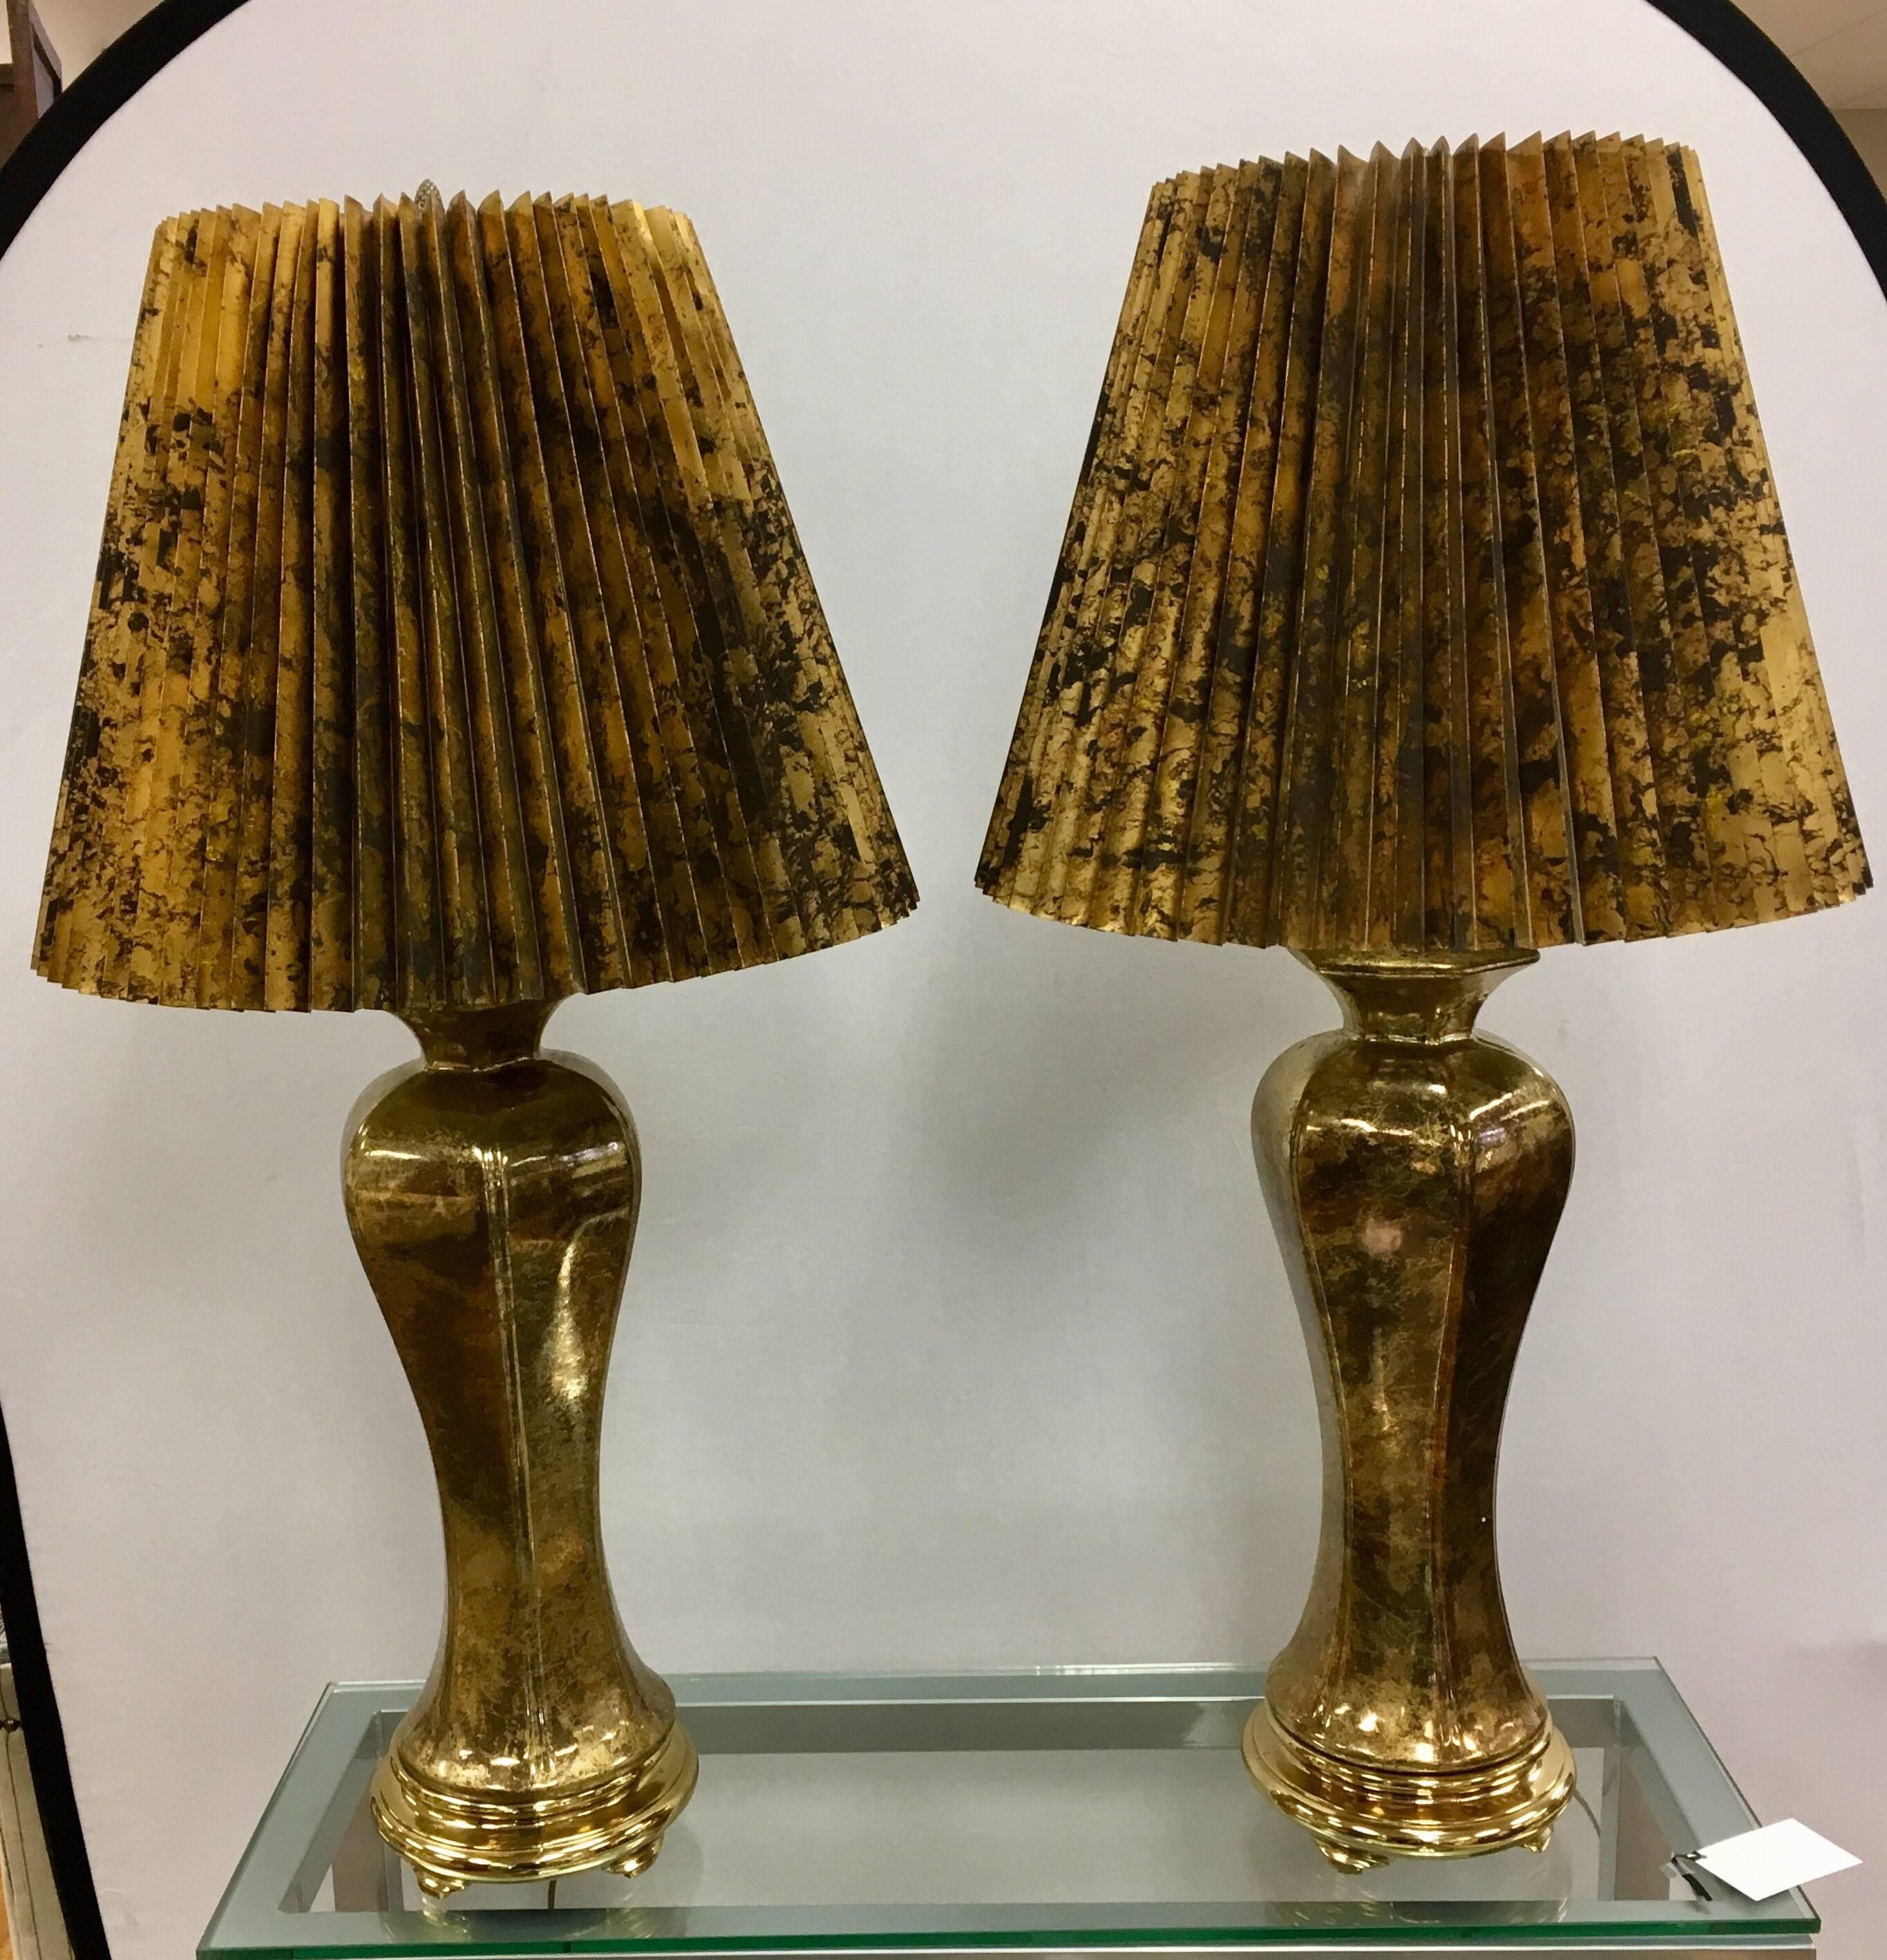 Coveted pair of Hollywood Regency urn shaped large table lamps glazed in gold.  They are in excellent condition and wired for US. Features include a single light socket per lamp, a shade that measures 19 inches in diameter and a brass pineapple